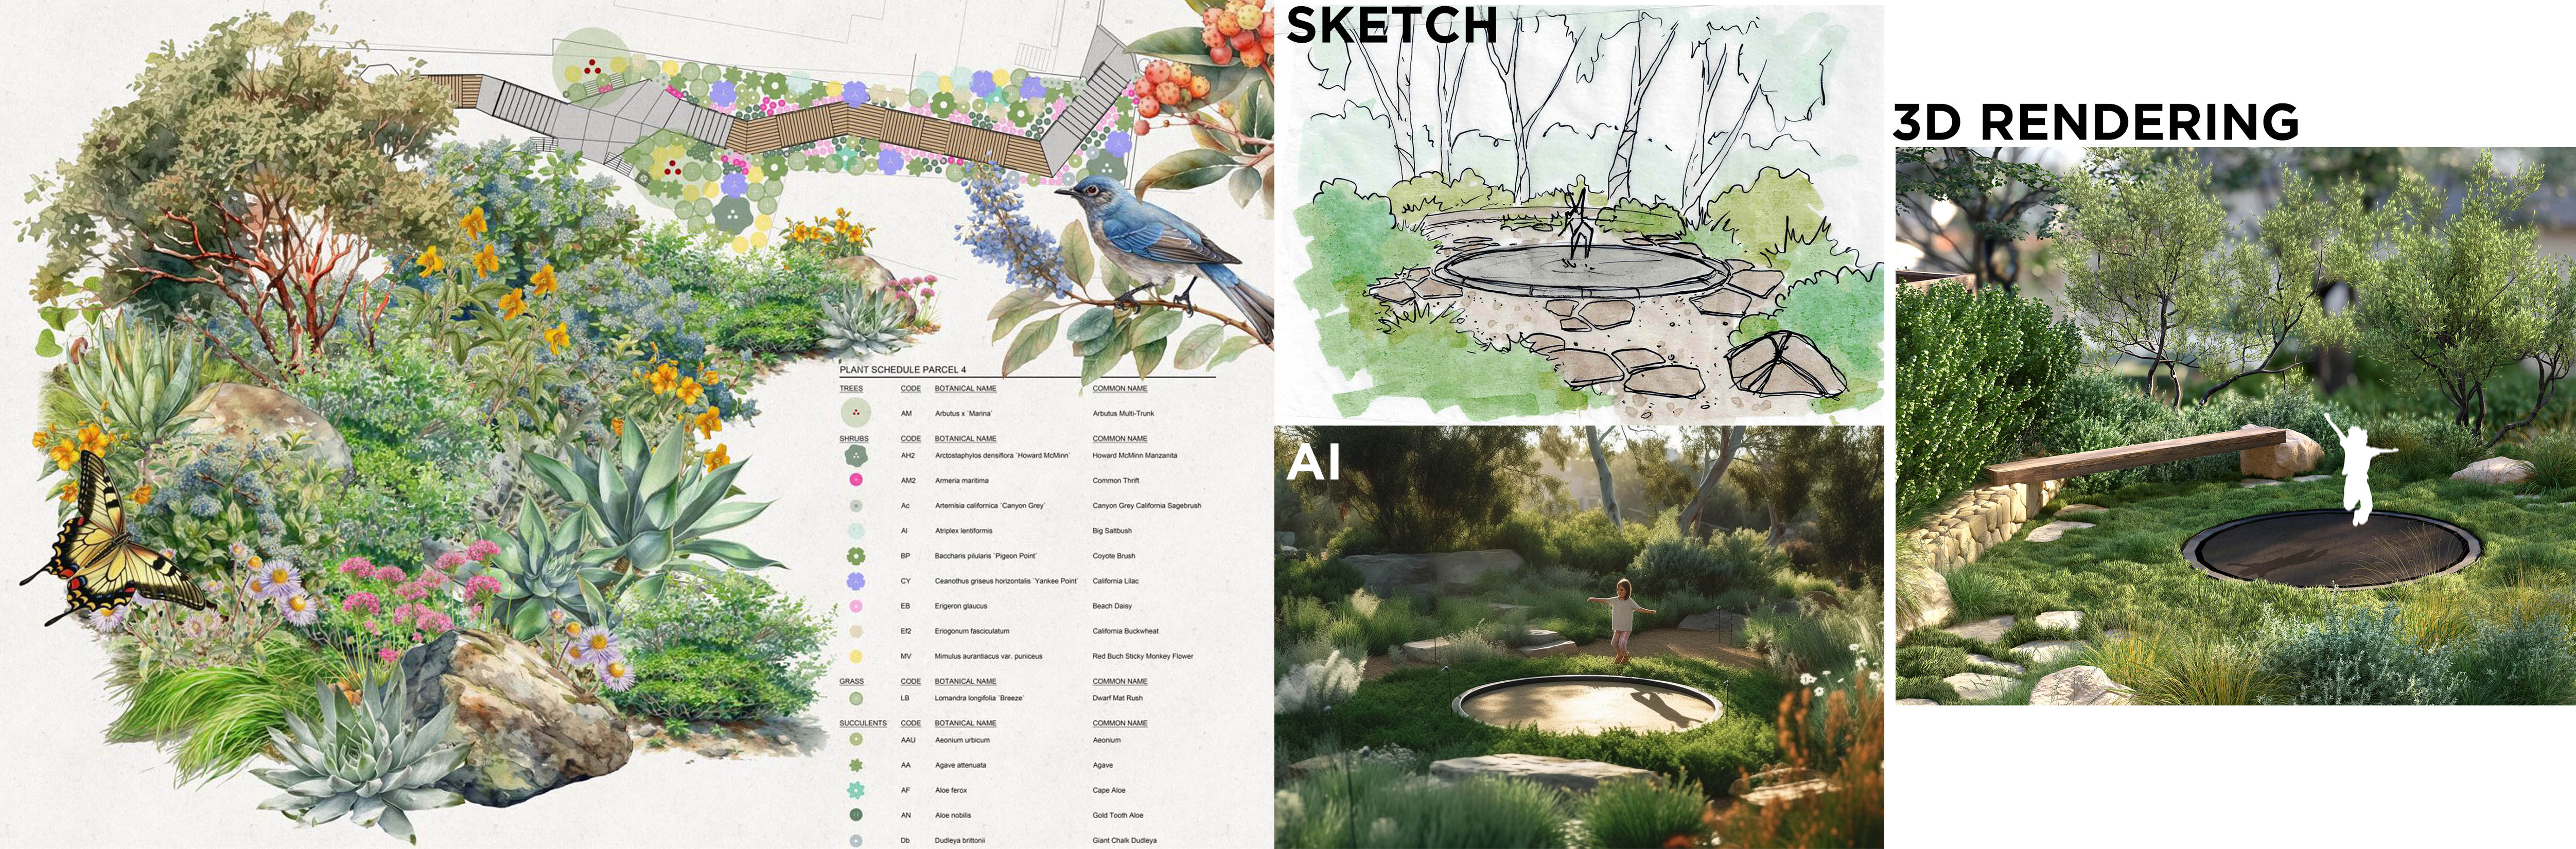 Topophylla uses Midjourney at both the concept level - integrated with modeling and construction drawings - as well as to create vibrant illustrative bouquets showing the site materials and design vision. 